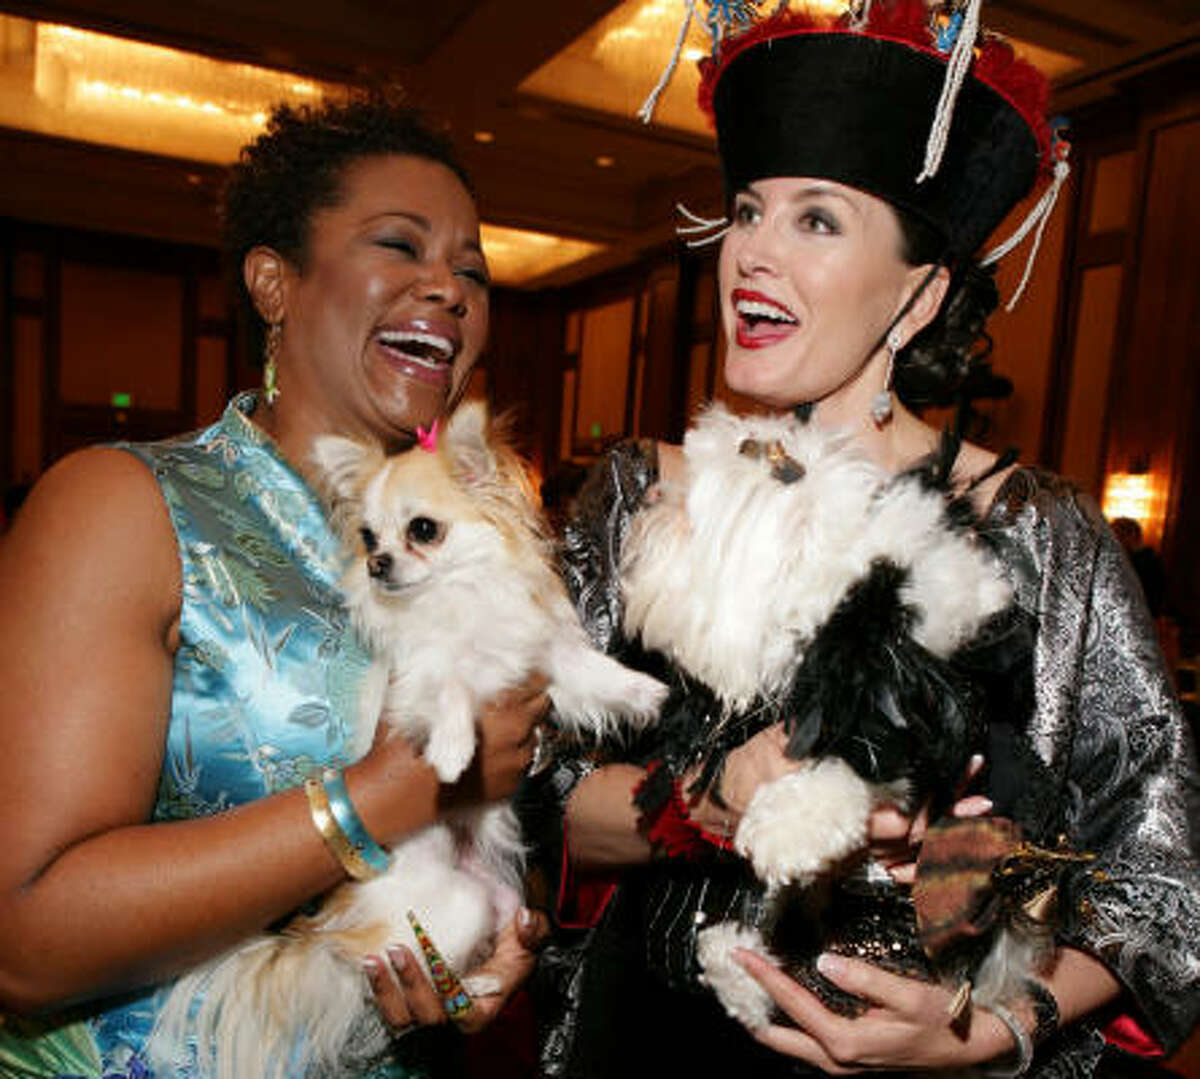 Debra Duncan, left, and Kimberly DeLape chaired the Citizens for Animal Protection 15th annual Mr. Magoo birthday party at the J.W. Marriott.